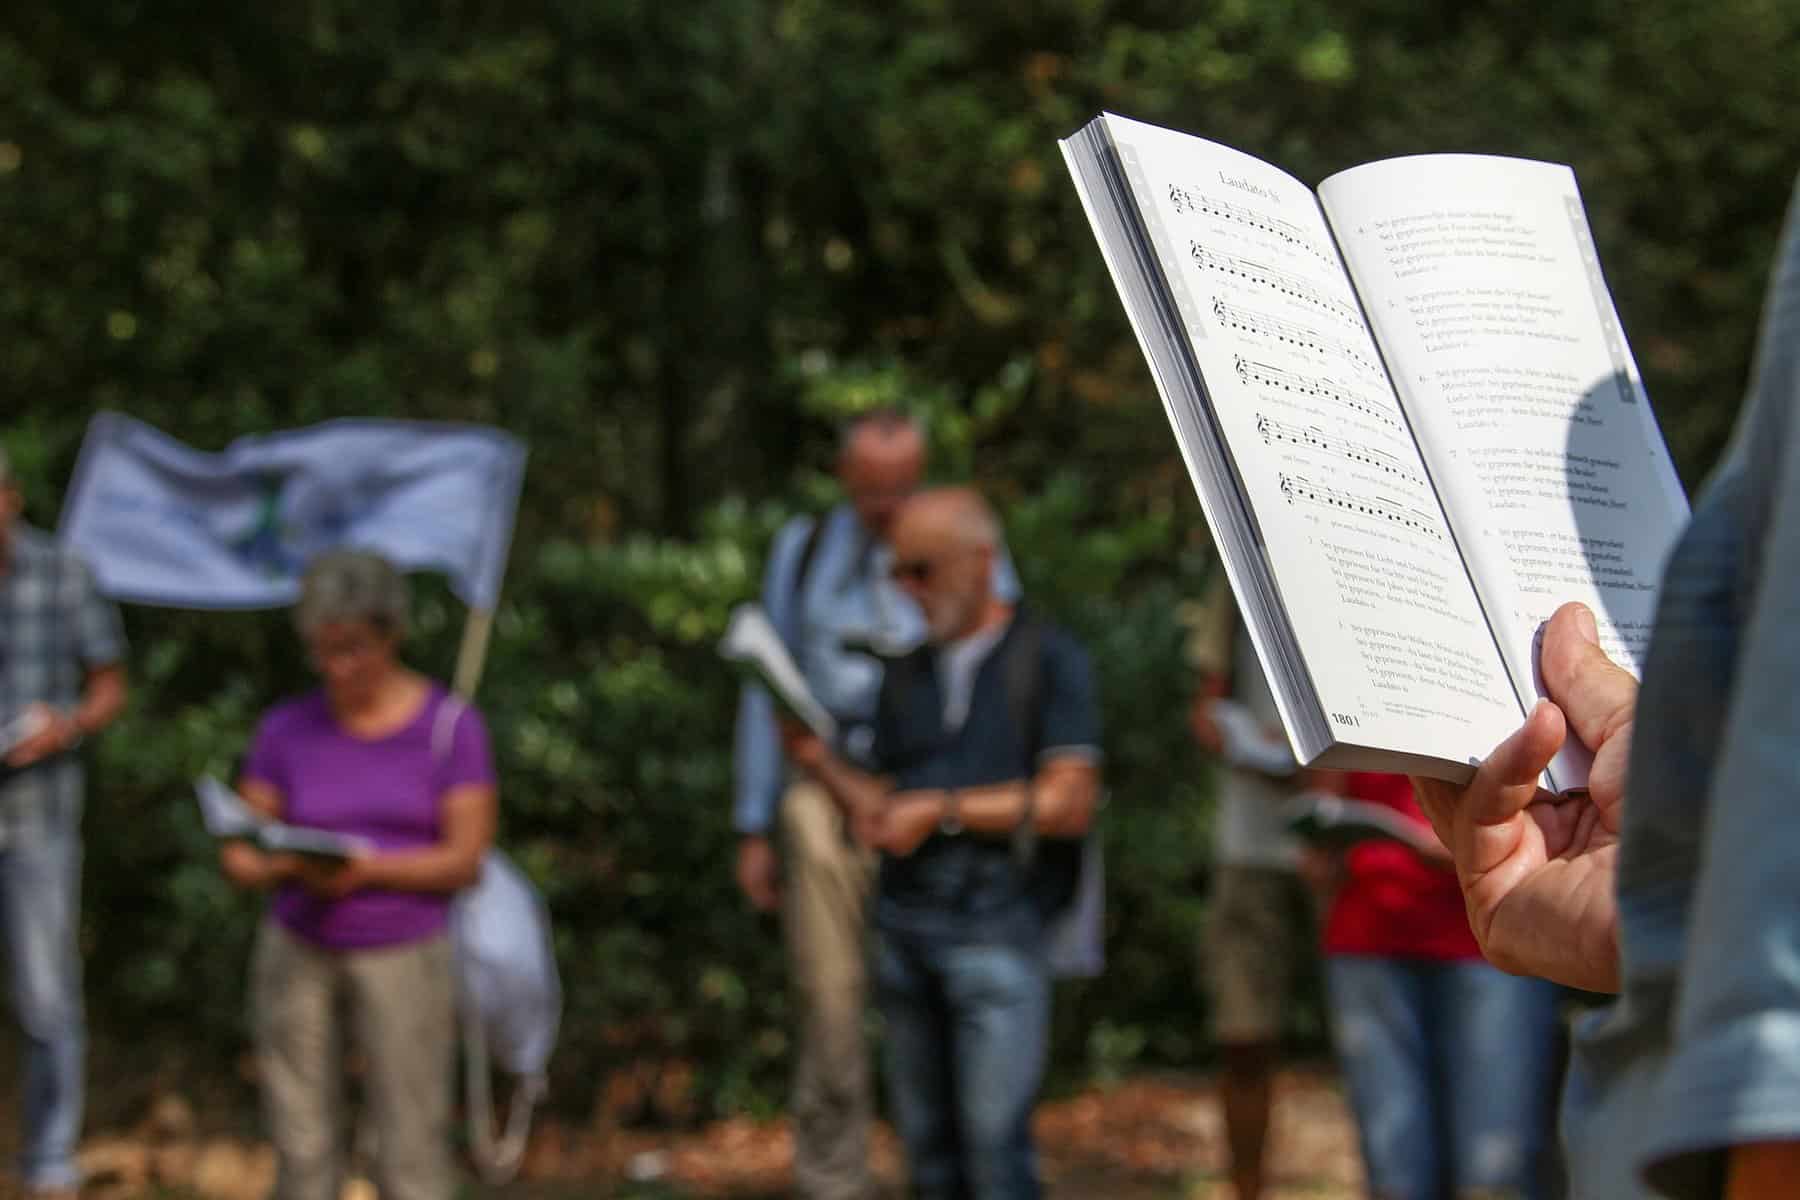 A person holds a songbook in front of them at an outdoor gathering along with others.